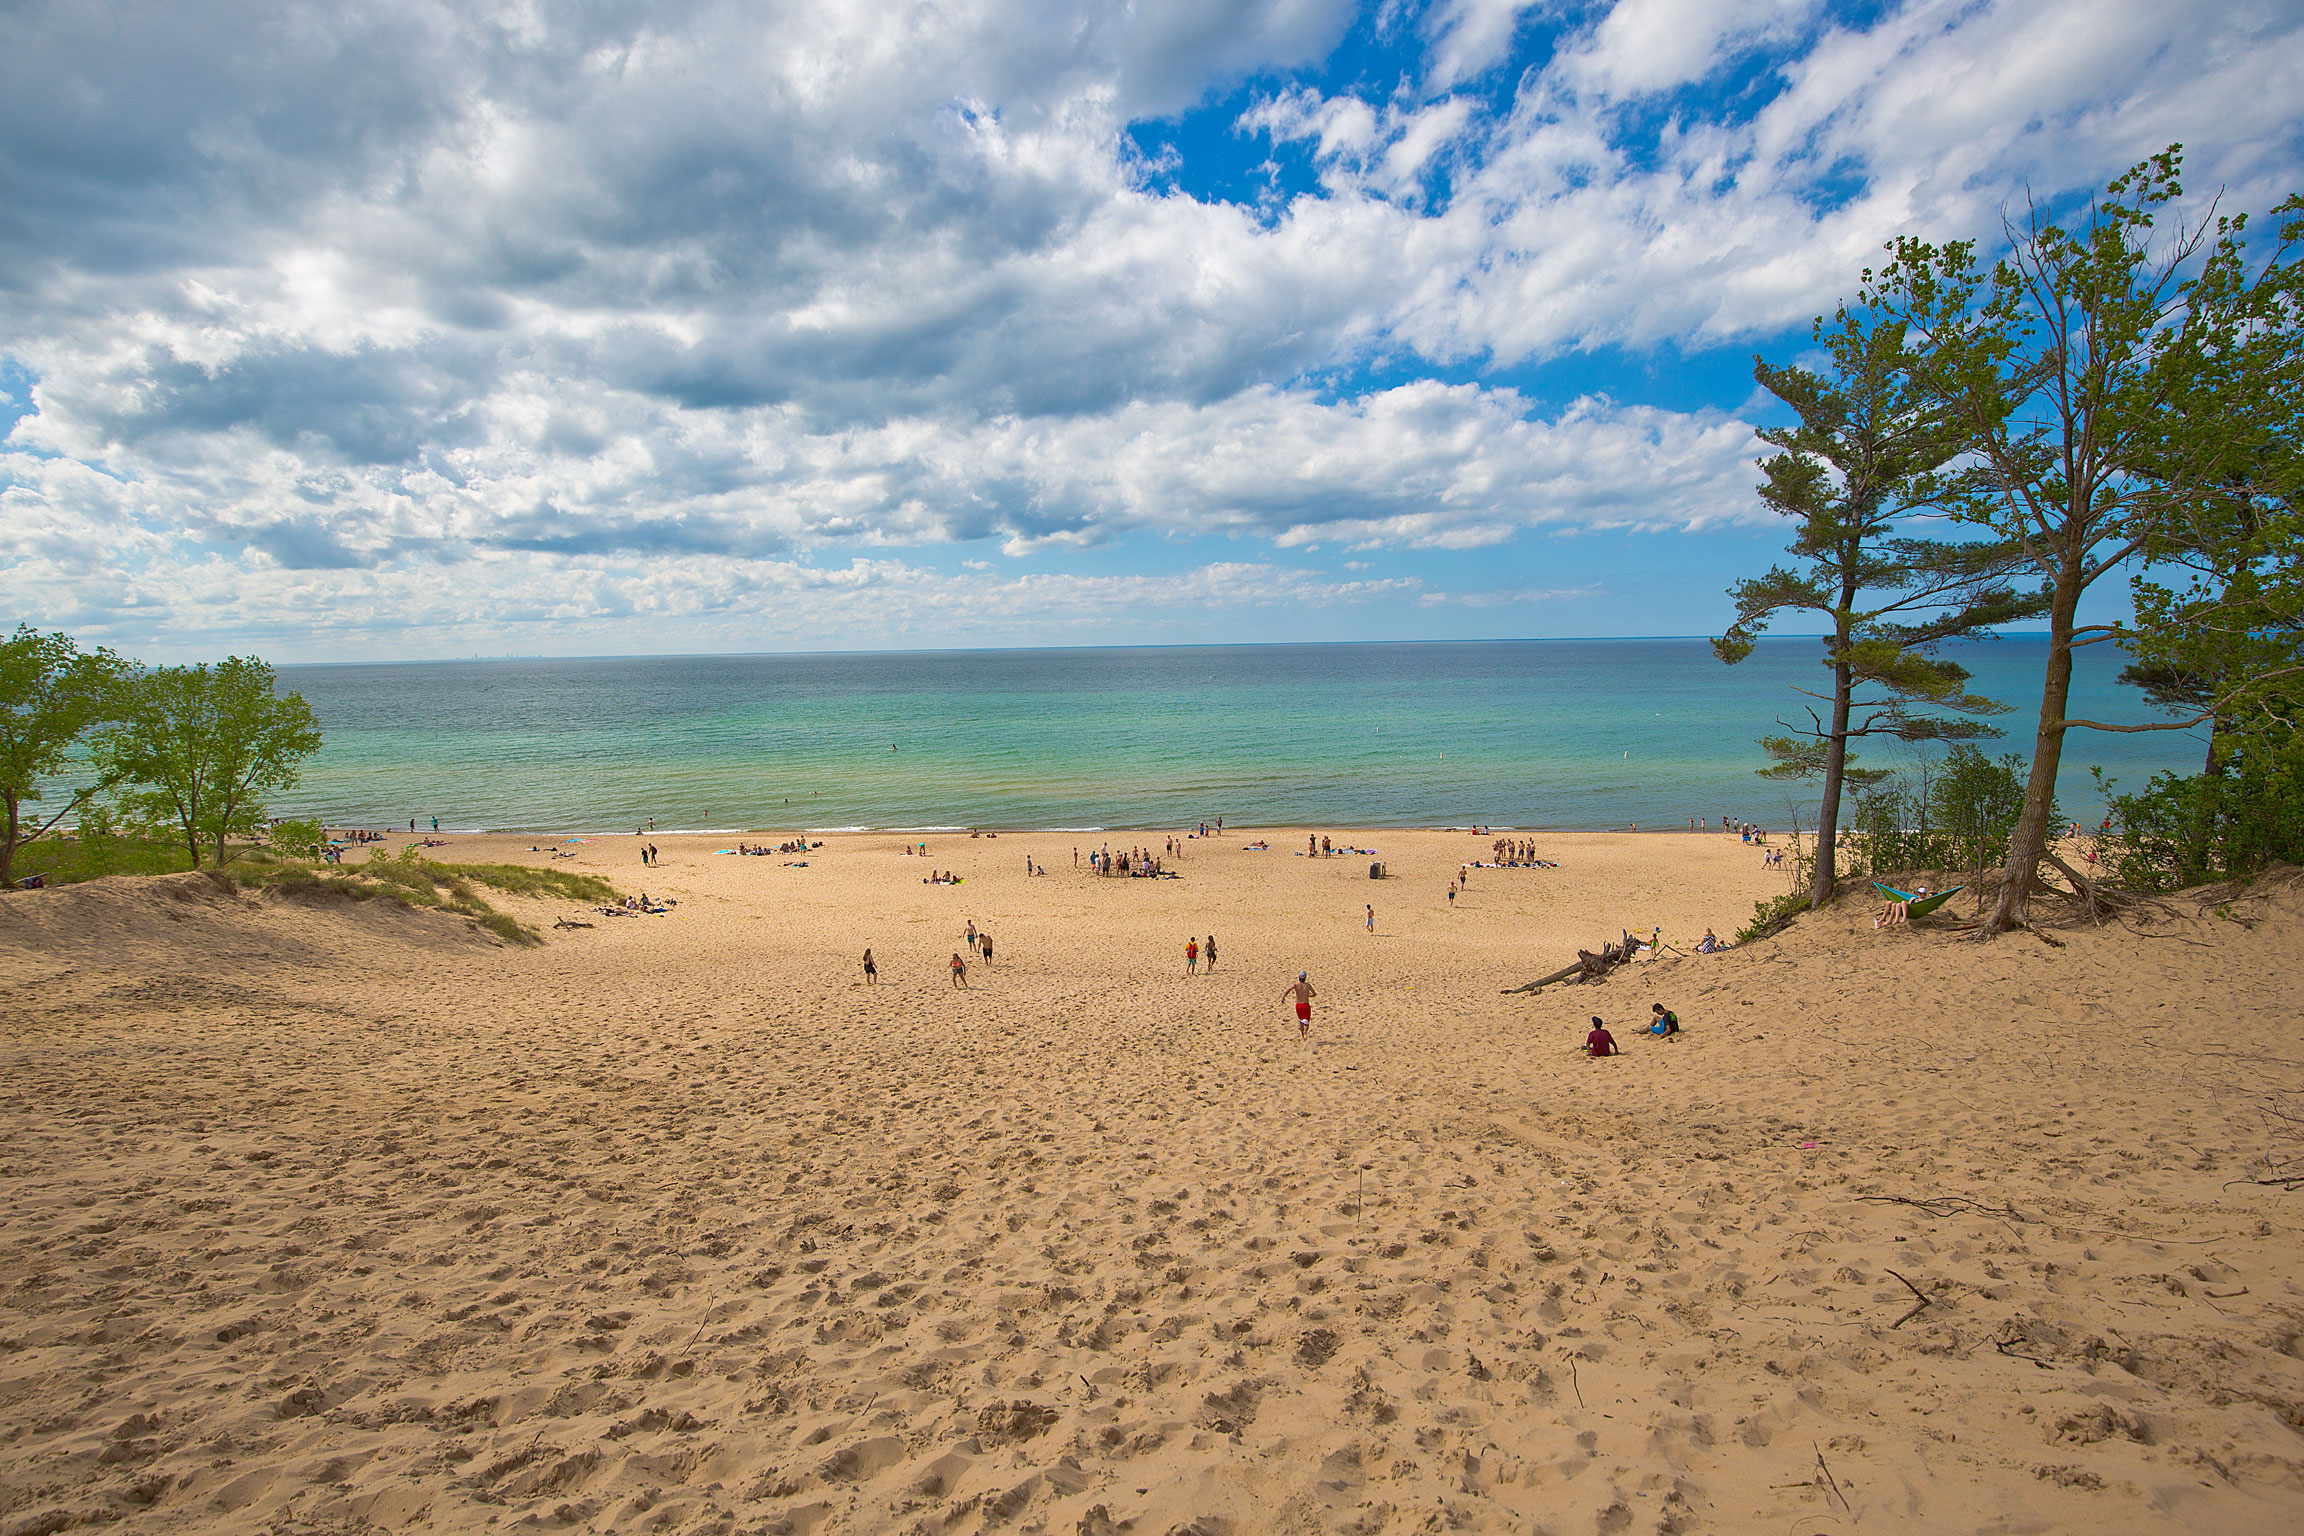 A beautiful day on the beach in Indiana Dunes State Park